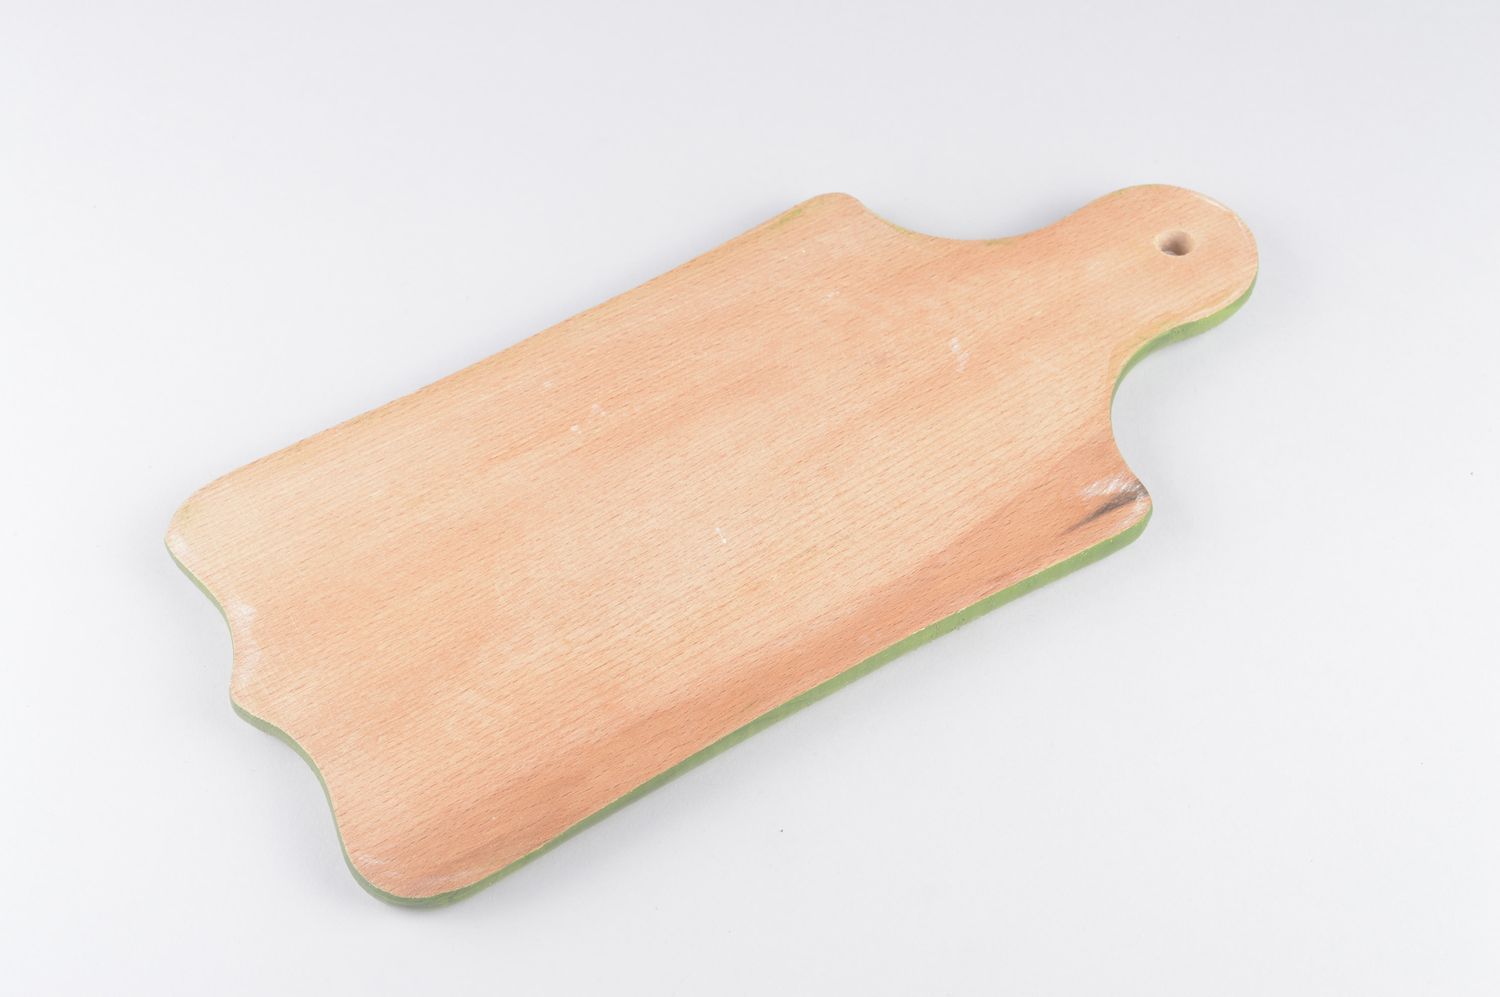 Homemade kitchen board wooden cutting board for decorative use only cool gifts photo 2